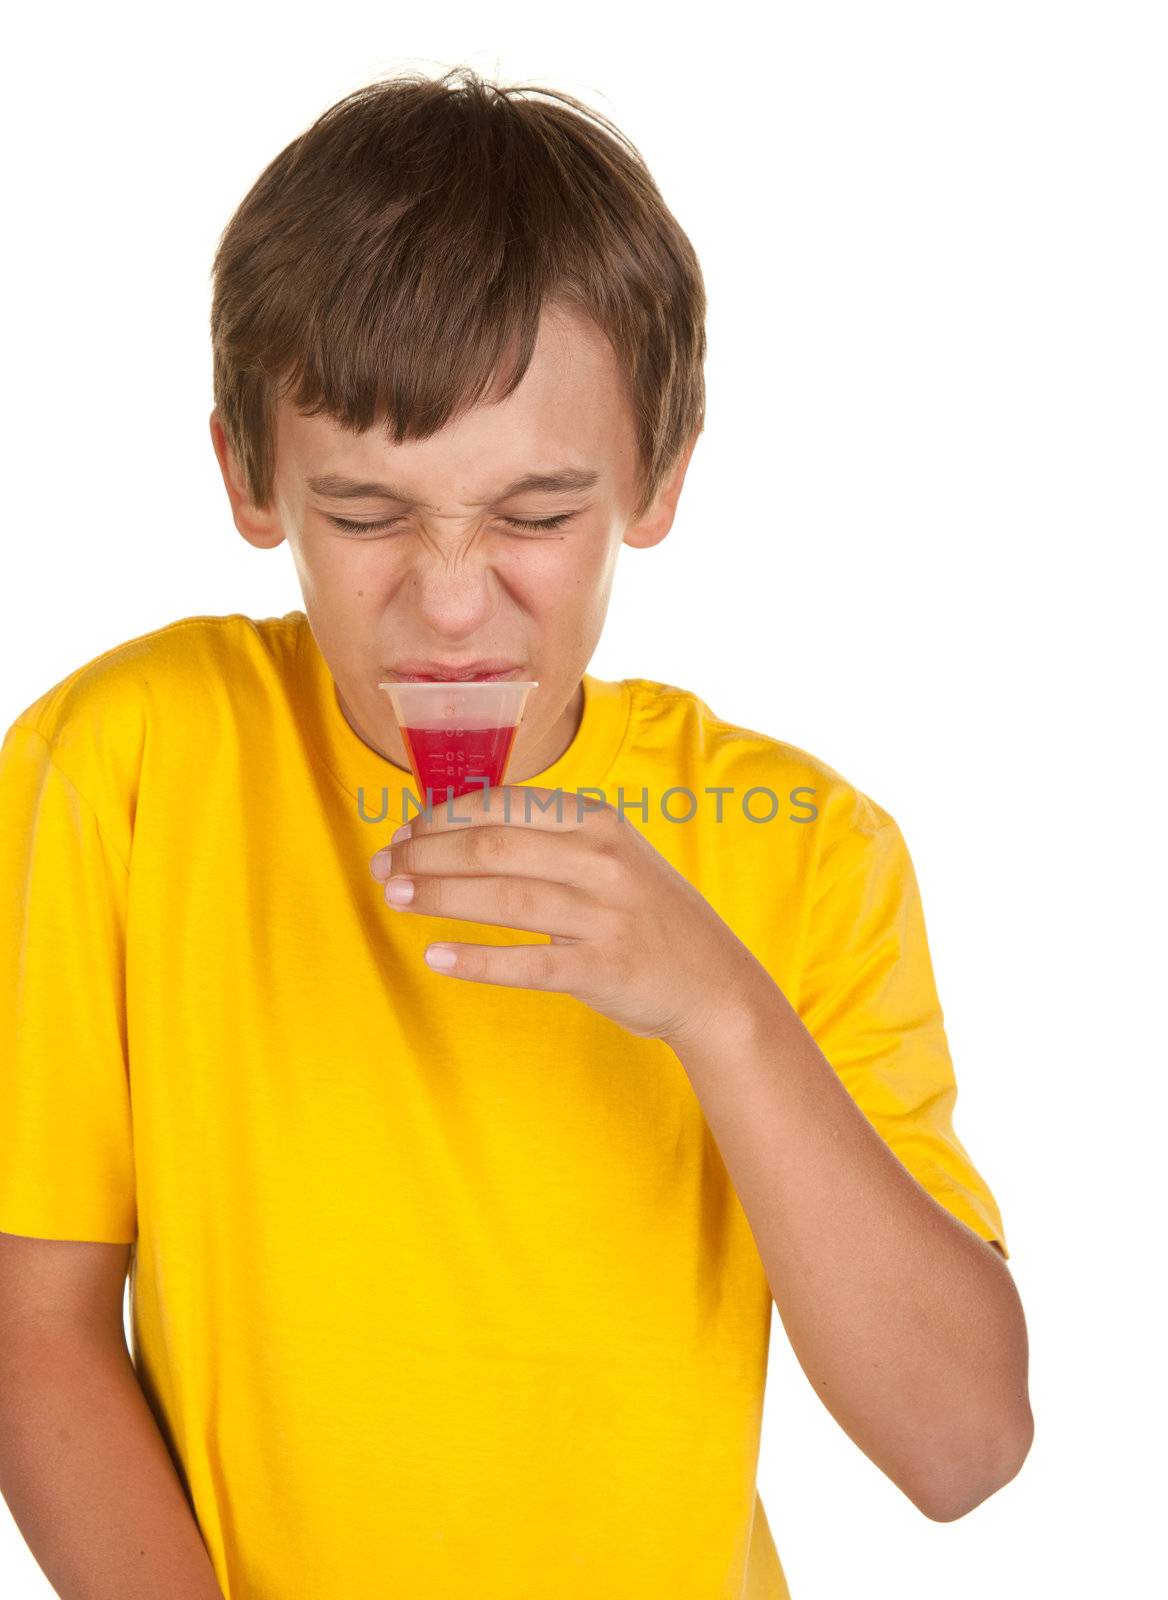 boy drinking medicine by clearviewstock